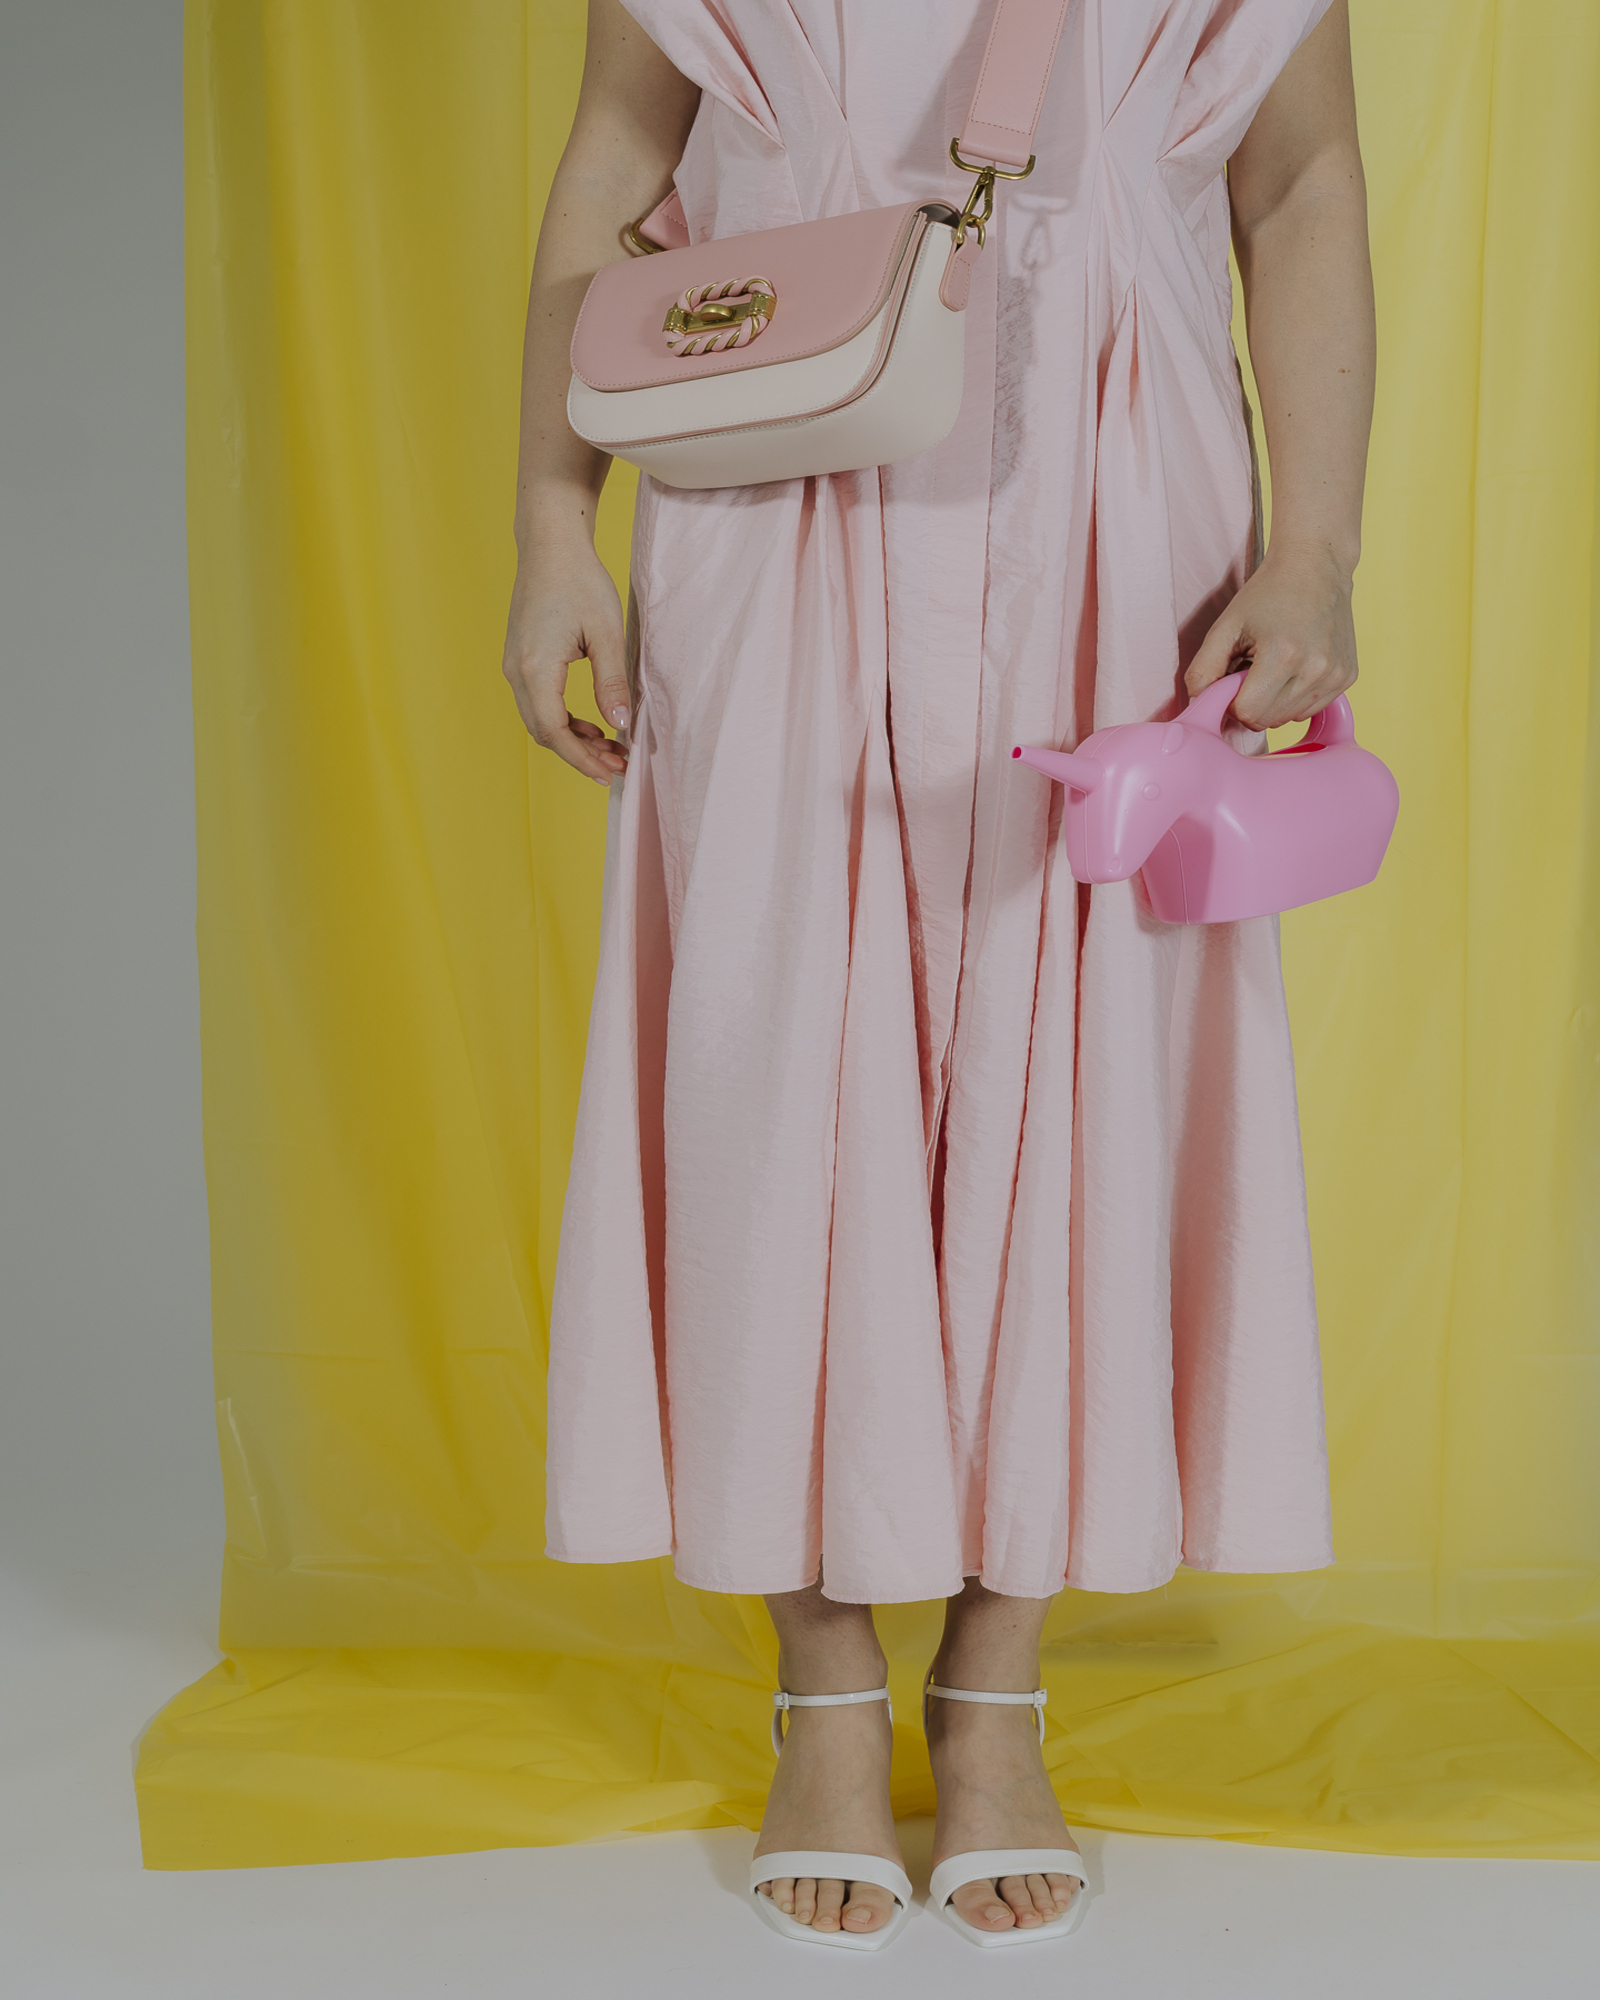 BAG PINK - STYLE1754